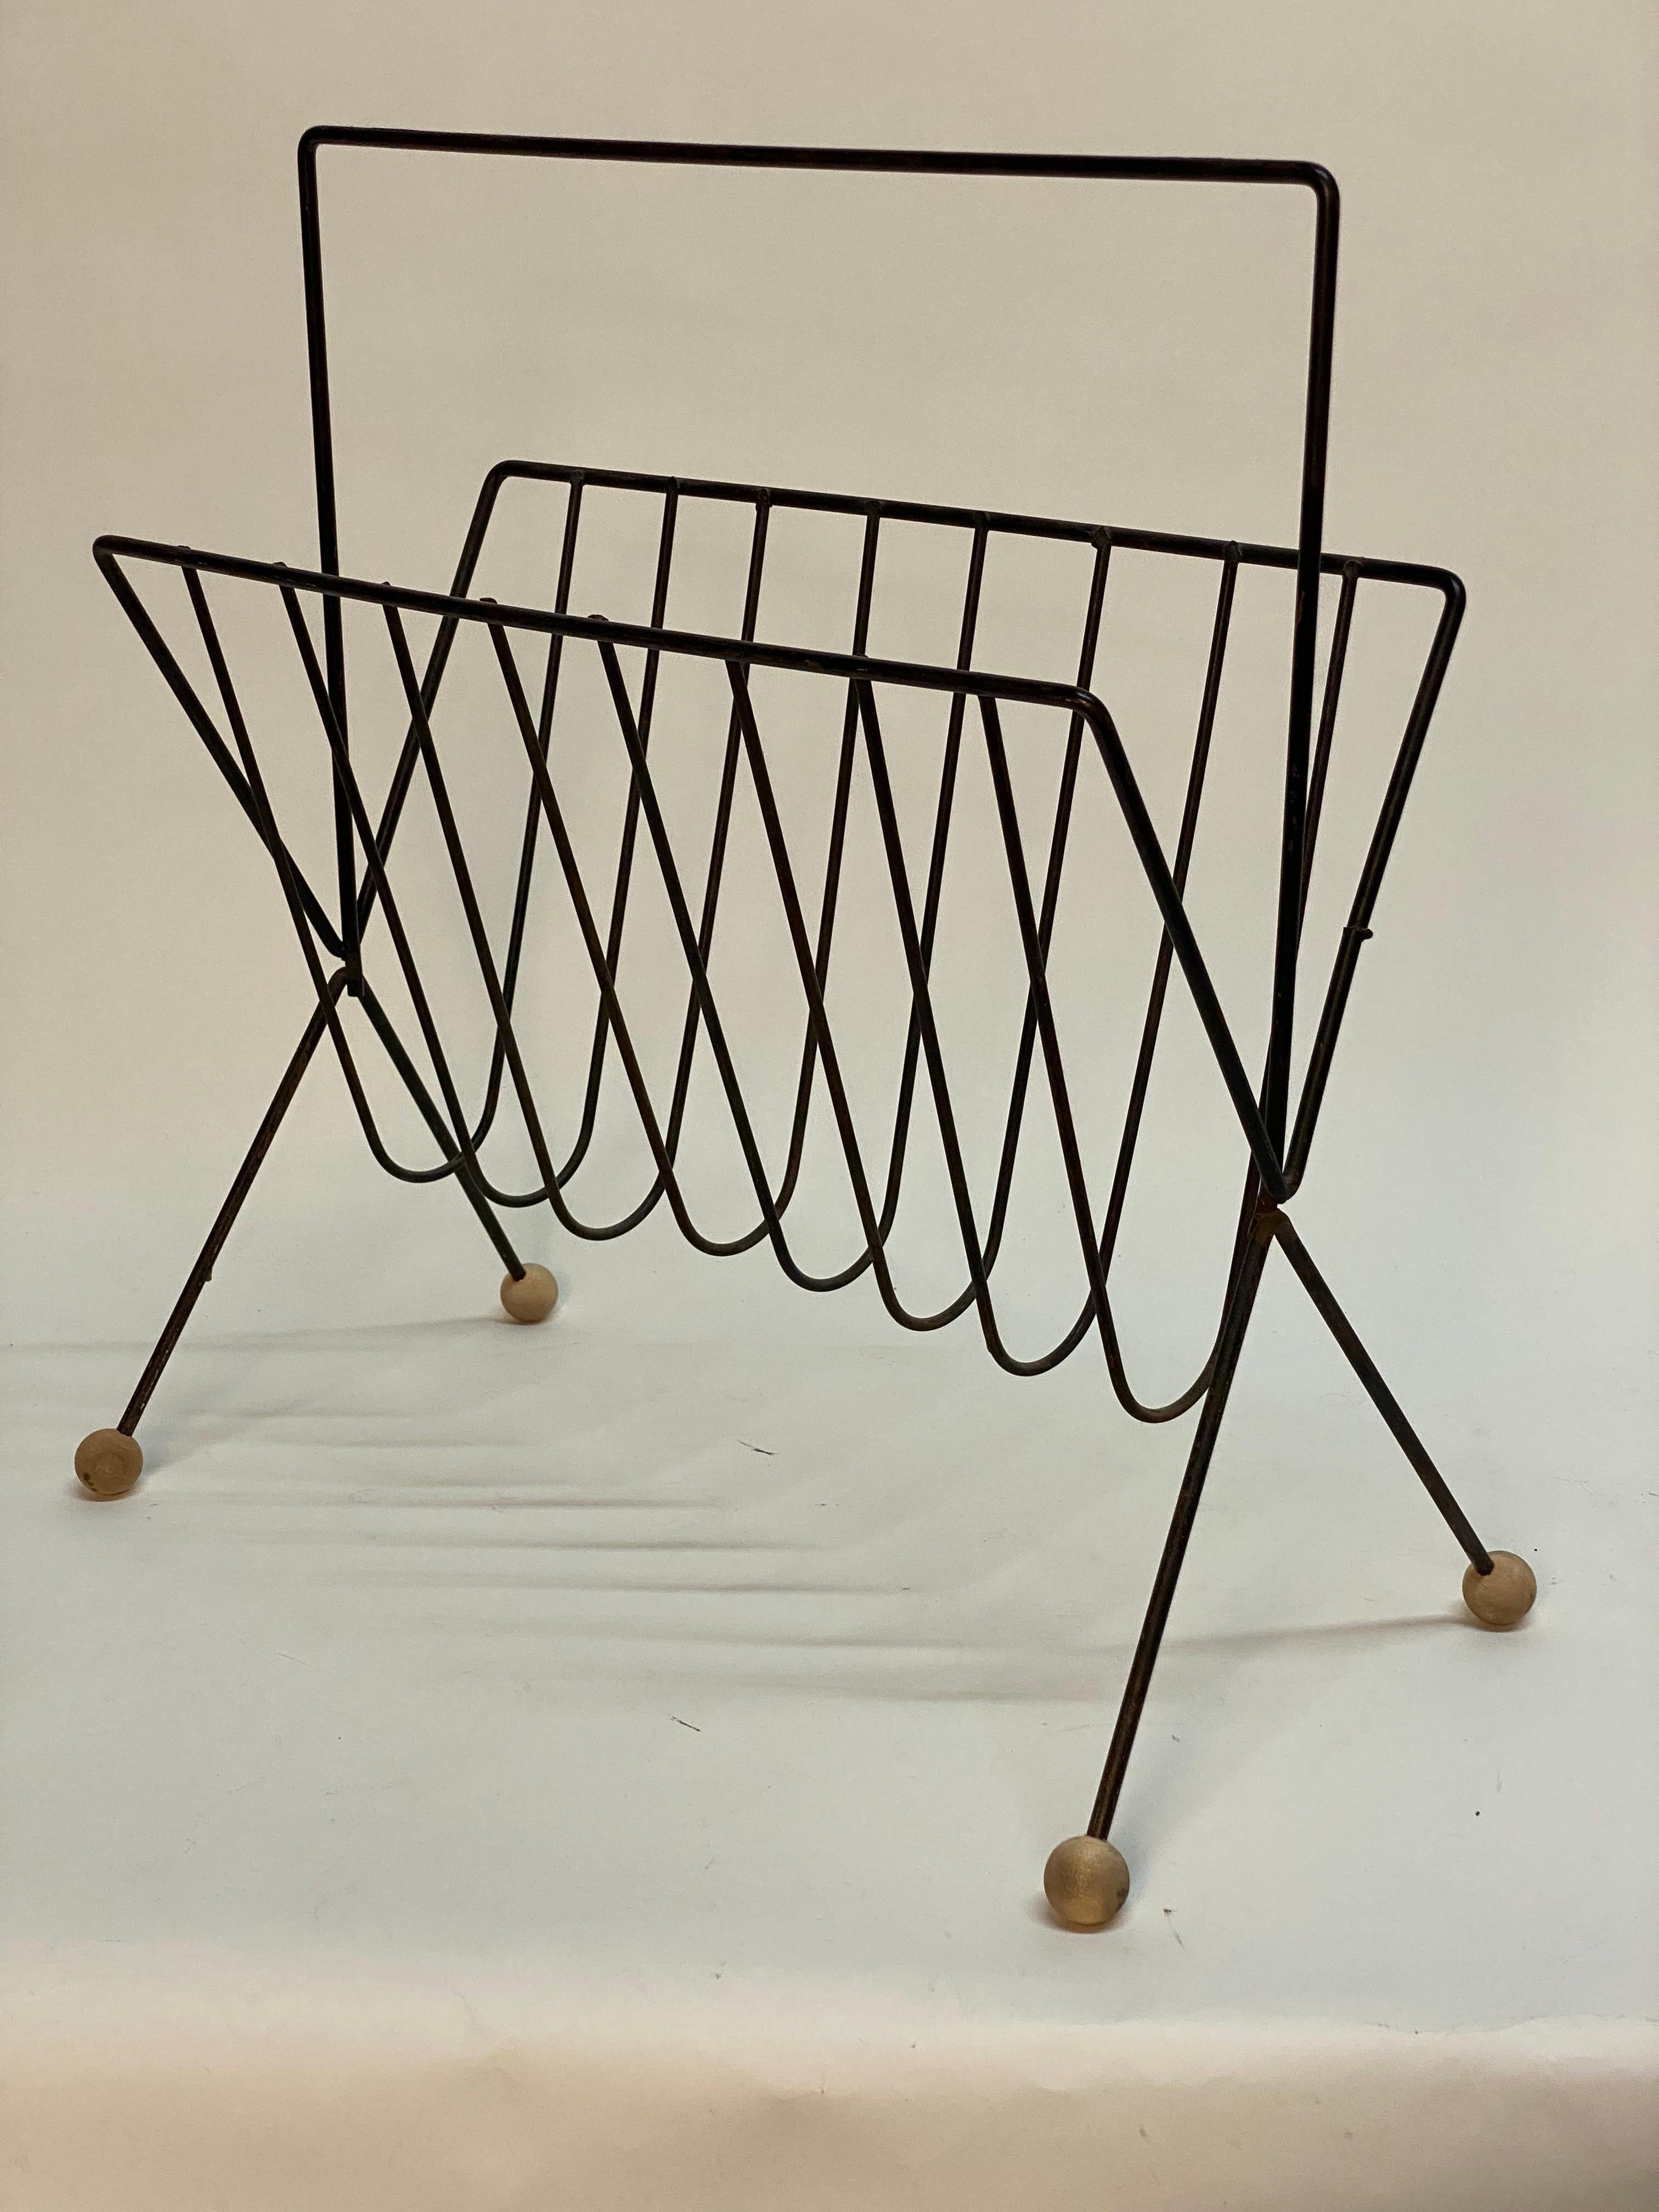 Bent iron with wood ball feet magazine rack designed by Tony Paul (1918-2010) for Woodlin-Hall. One of The United States top industrial designers. Designing everything from furniture to lighting for Westwood, Raymor, Robert Barber, Verplex,